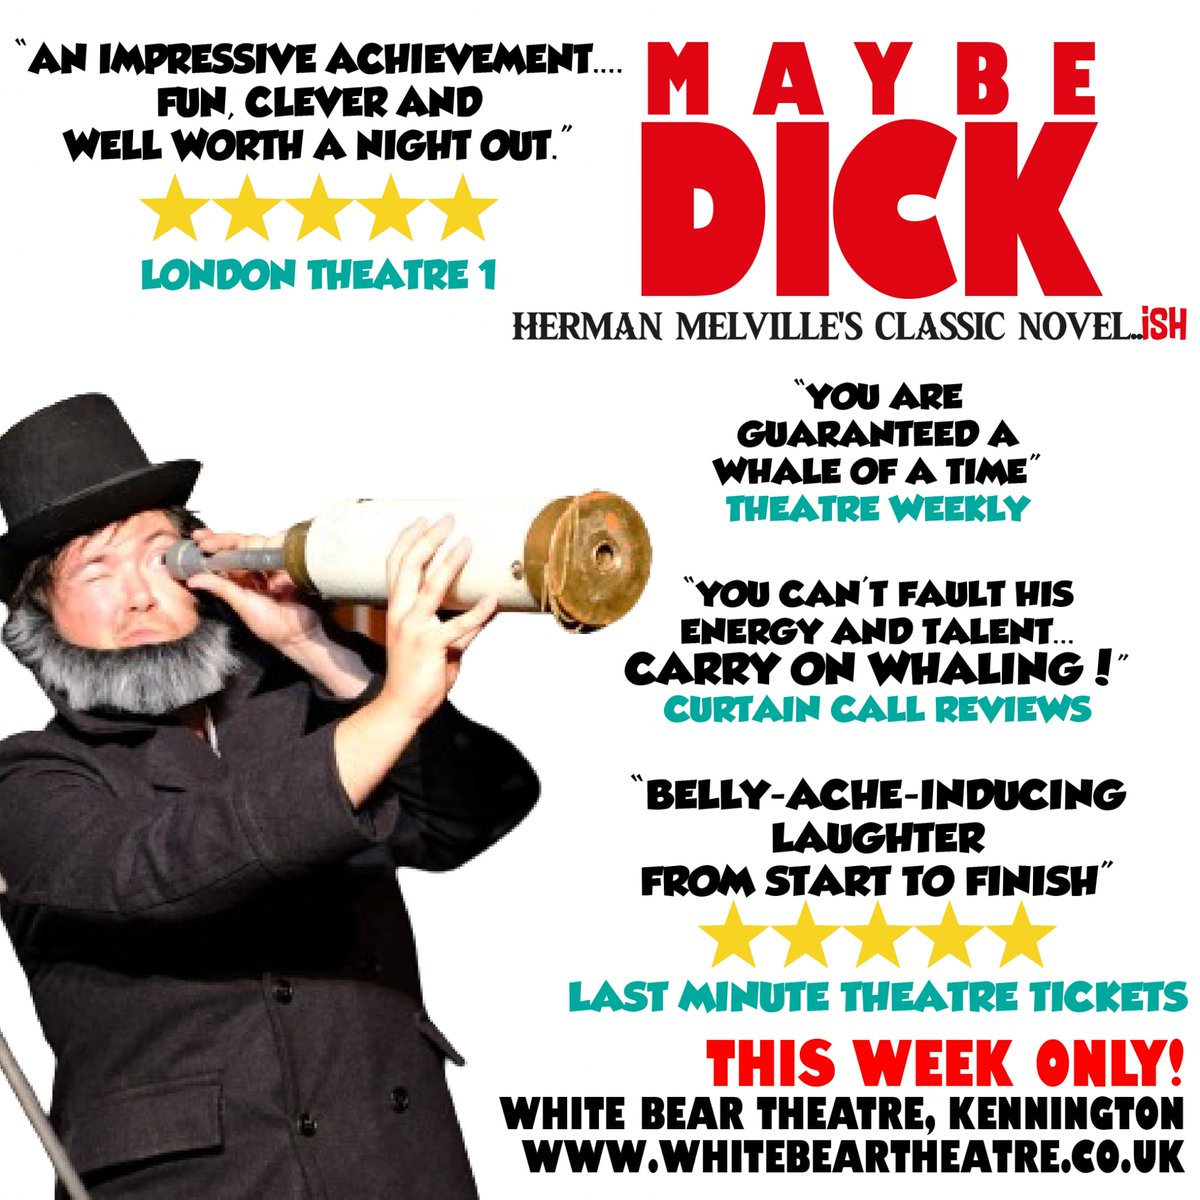 Well, the critics had a whale of a time. Three shows left!